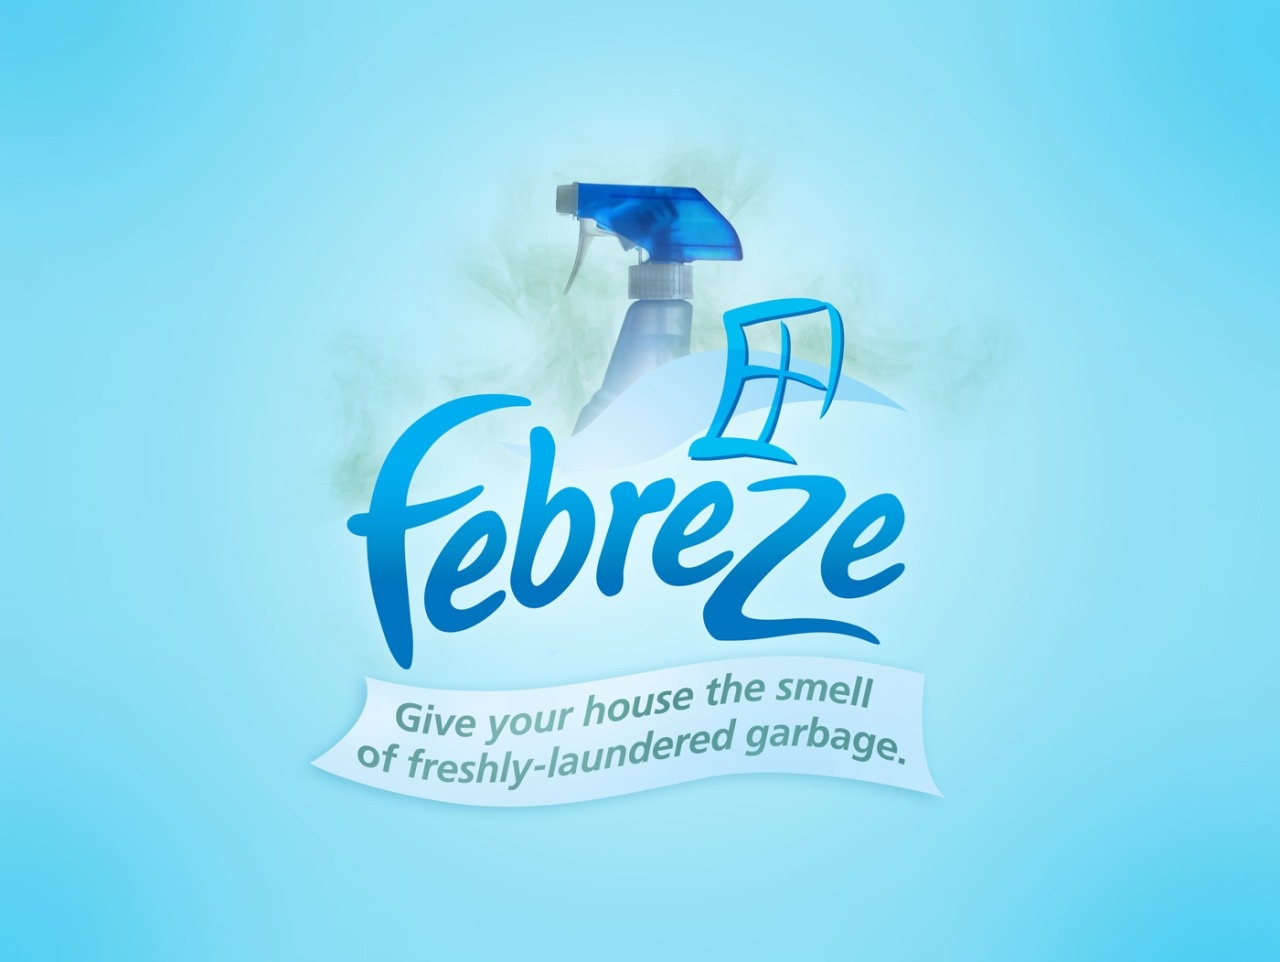 febreze slogan - Febreze Give your house the smell of freshlylaun laundered garbage